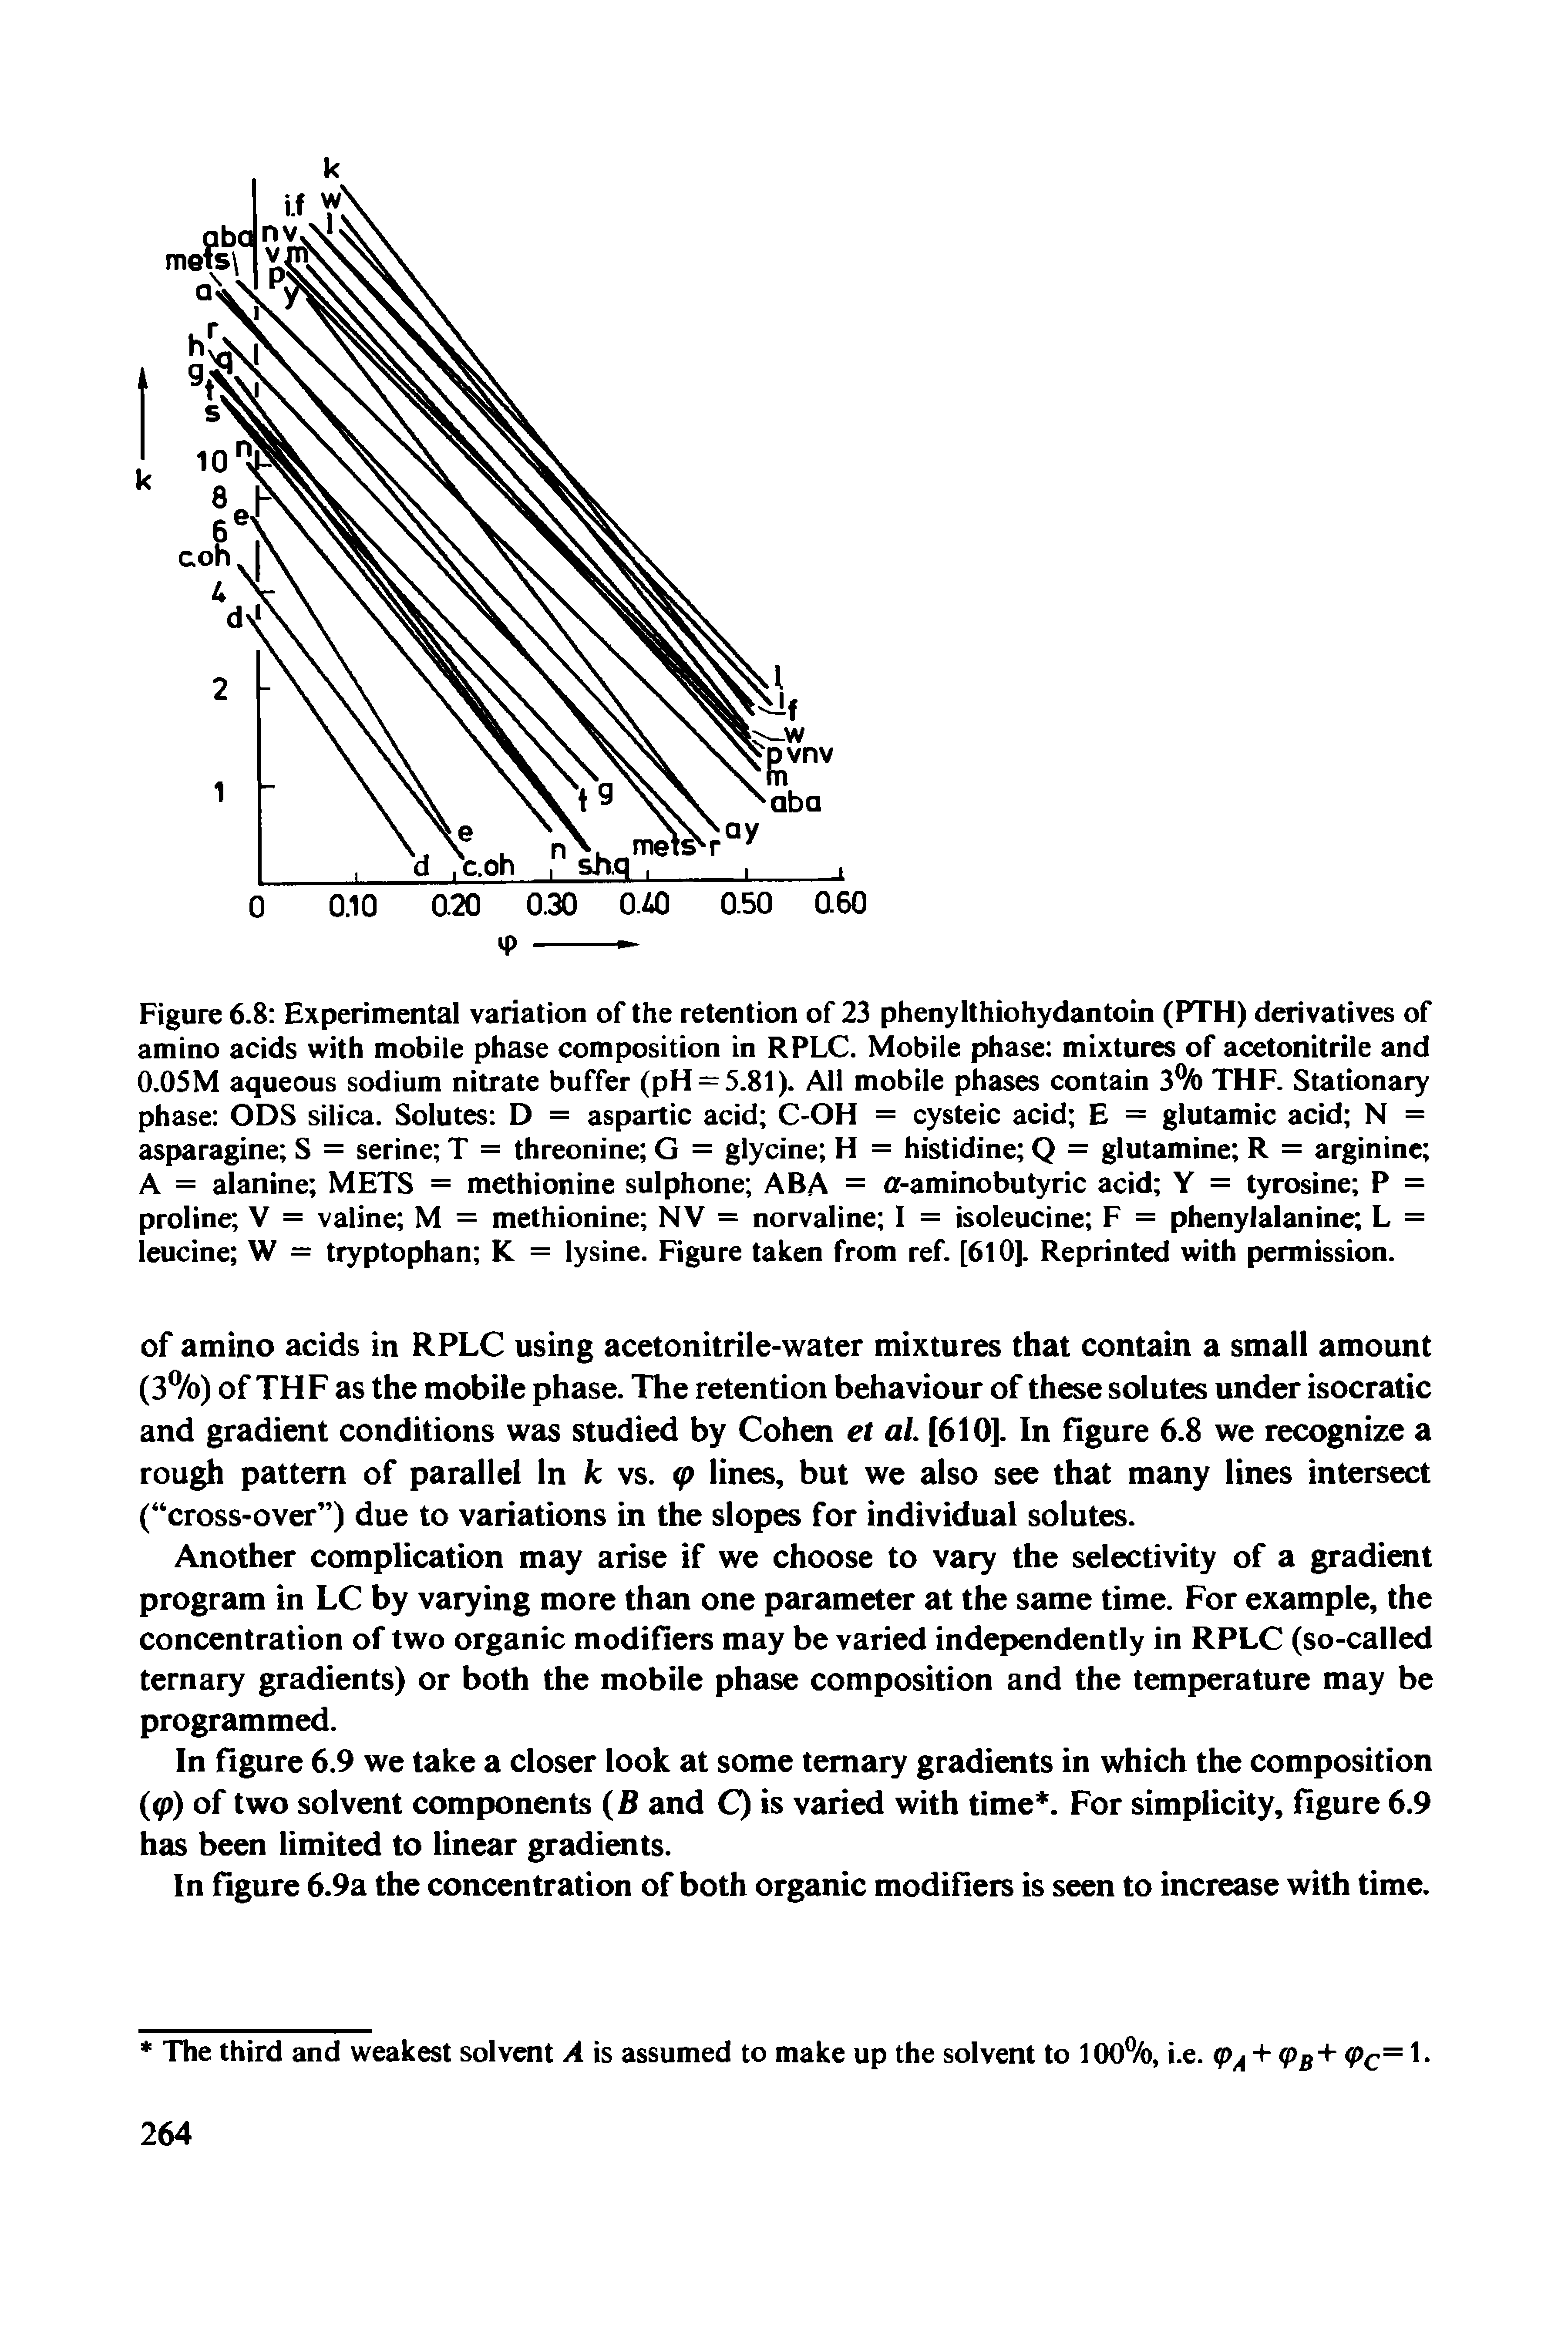 Figure 6.8 Experimental variation of the retention of 23 phenylthiohydantoin (PTH) derivatives of amino acids with mobile phase composition in RPLC. Mobile phase mixtures of acetonitrile and 0.05M aqueous sodium nitrate buffer (pH — 5.81). All mobile phases contain 3% THF. Stationary phase ODS silica. Solutes D = aspartic acid C-OH = cysteic acid E = glutamic acid N = asparagine S = serine T = threonine G = glycine H = histidine Q = glutamine R = arginine A = alanine METS = methionine sulphone ABA = a-aminobutyric acid Y = tyrosine P = proline V = valine M = methionine NV = norvaline I = isoleucine F = phenylalanine L = leucine W = tryptophan K = lysine. Figure taken from ref. [610]. Reprinted with permission.